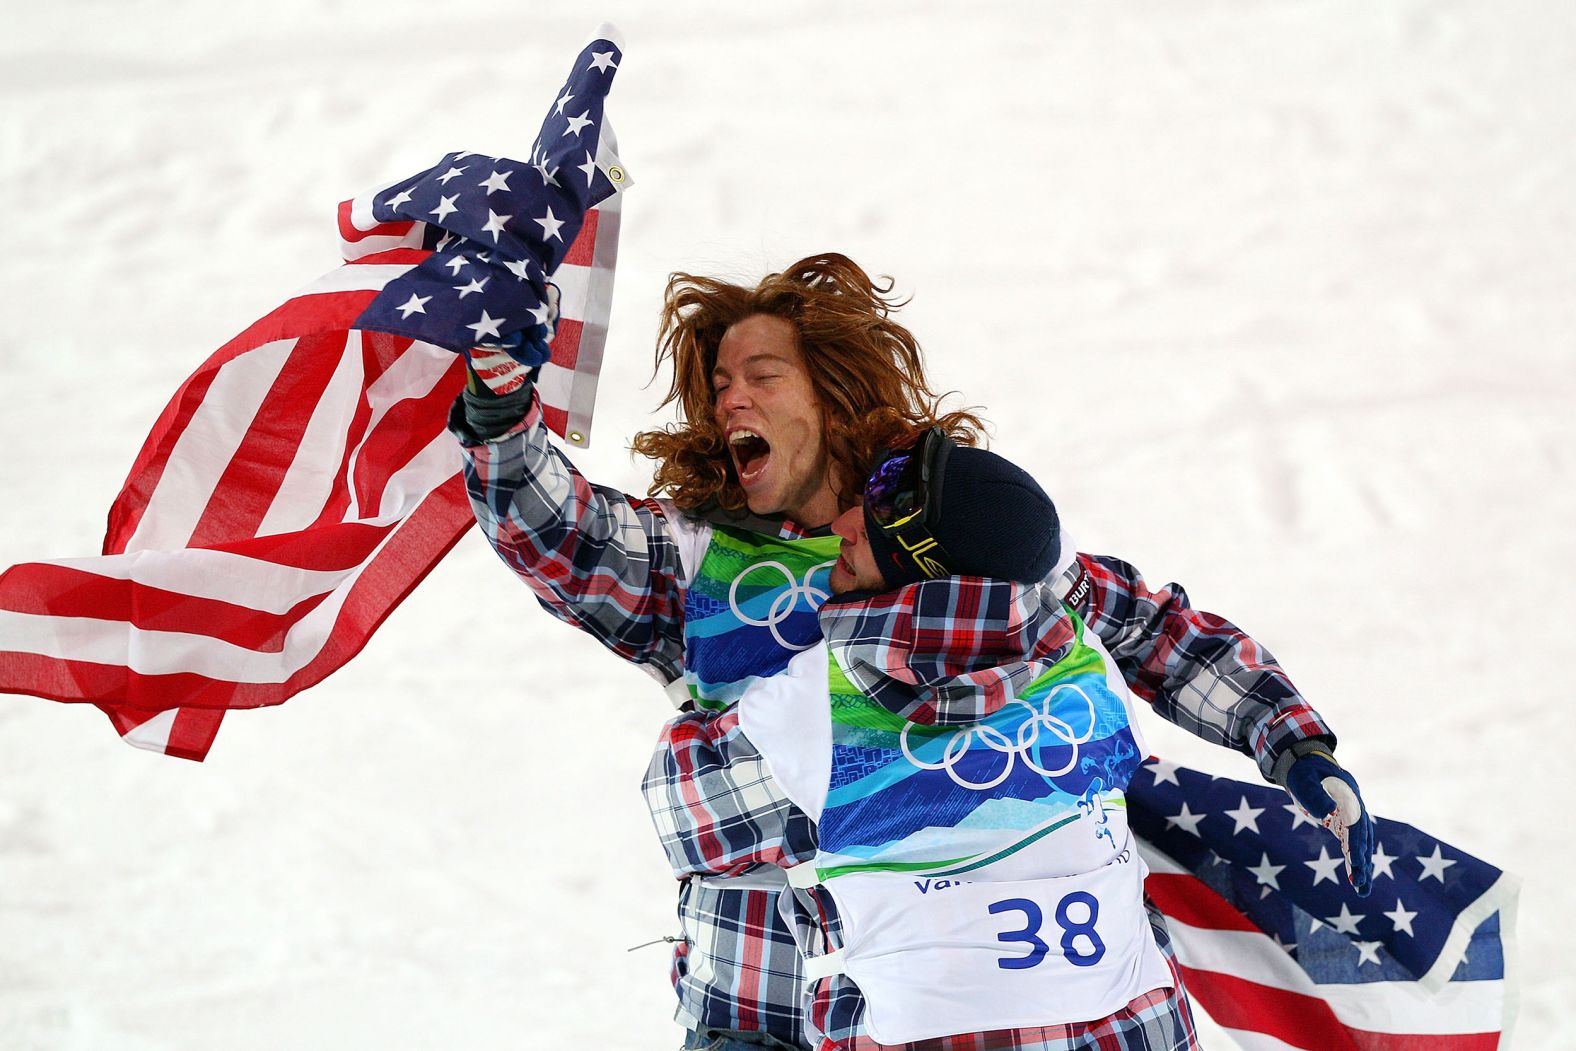 Snowboarding made its Olympic debut in 1998, but Shaun White took it to another level in 2010. The redheaded American known as "The Flying Tomato" dazzled on the halfpipe, showing off new tricks on his way to defending his Olympic crown. He already had the gold wrapped up by his second run, where he landed a double McTwist 1260 he called the "Tomahawk." White finished fourth on the halfpipe in 2014, but he came back in 2018 and won gold again.